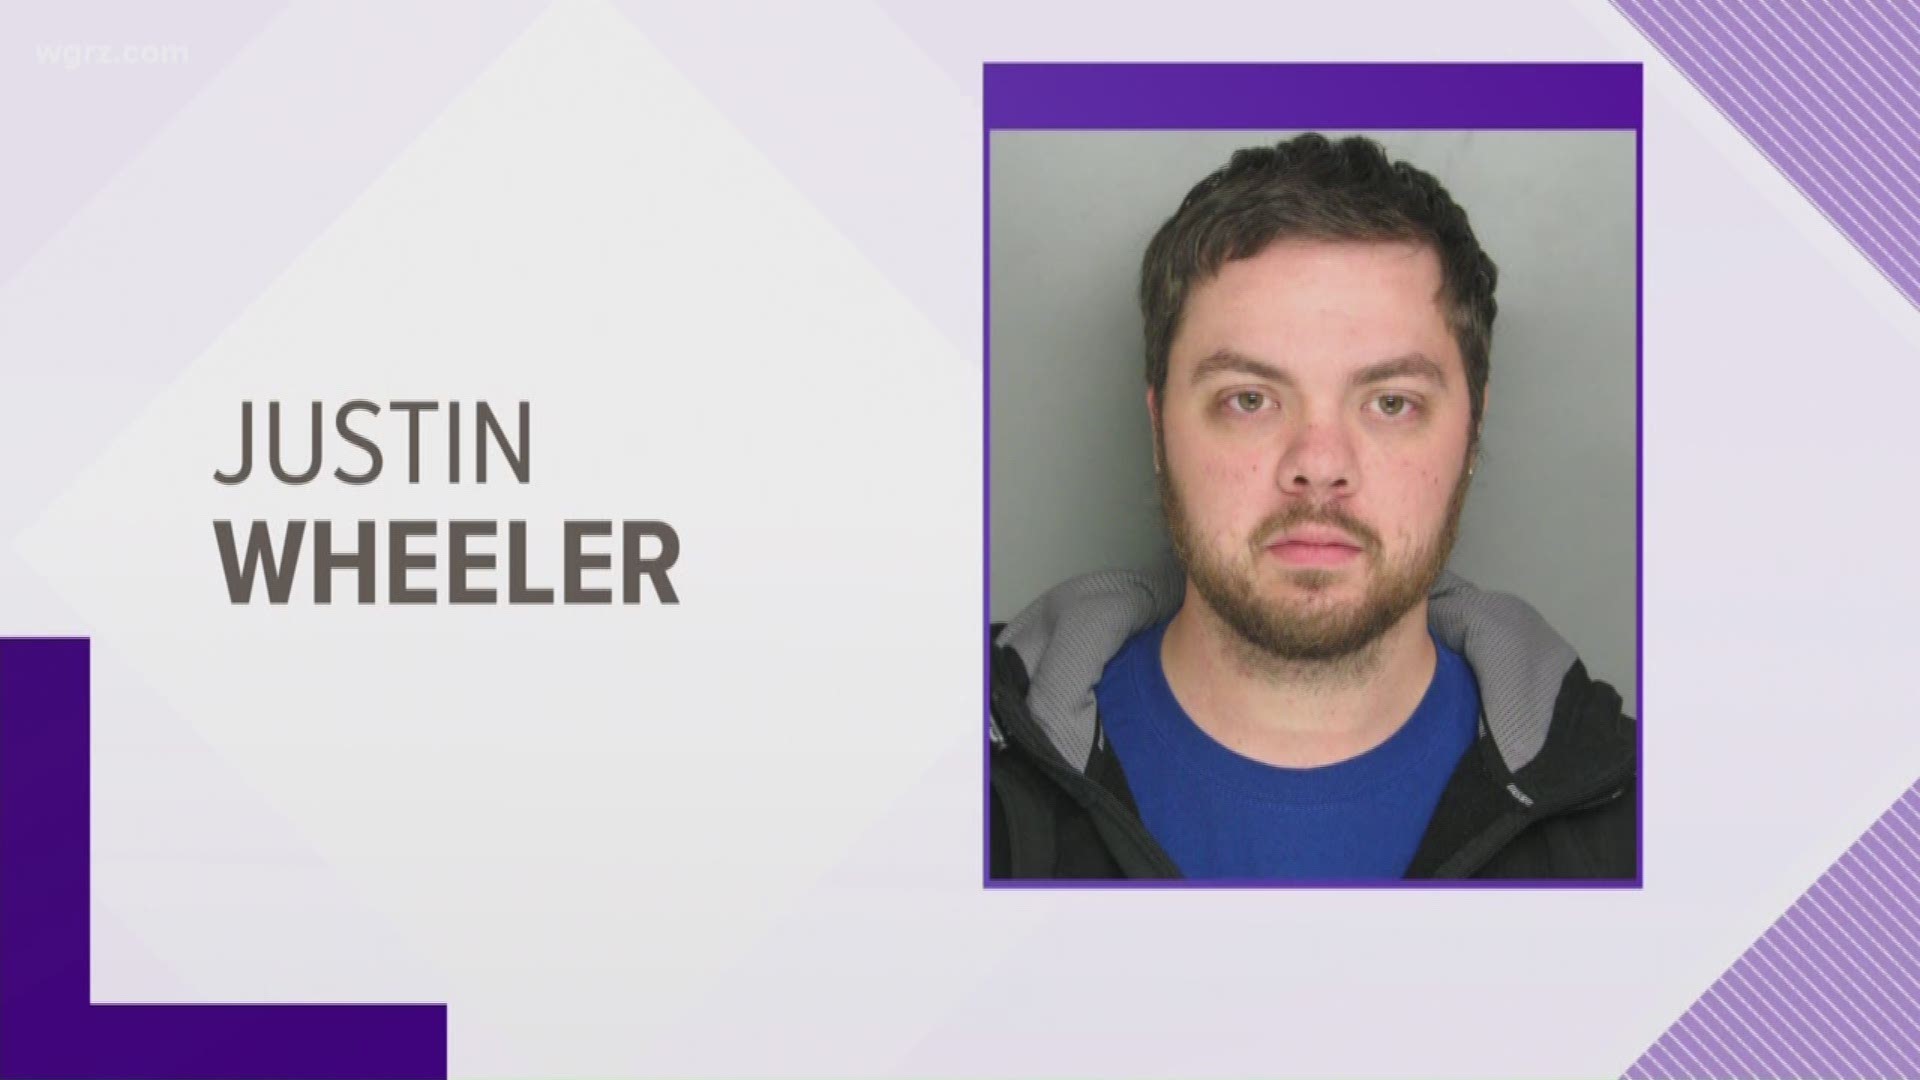 27-year-old Justin Wheeler pleaded guilty to a child porn possession charge today that will get him at least 10 years in prison